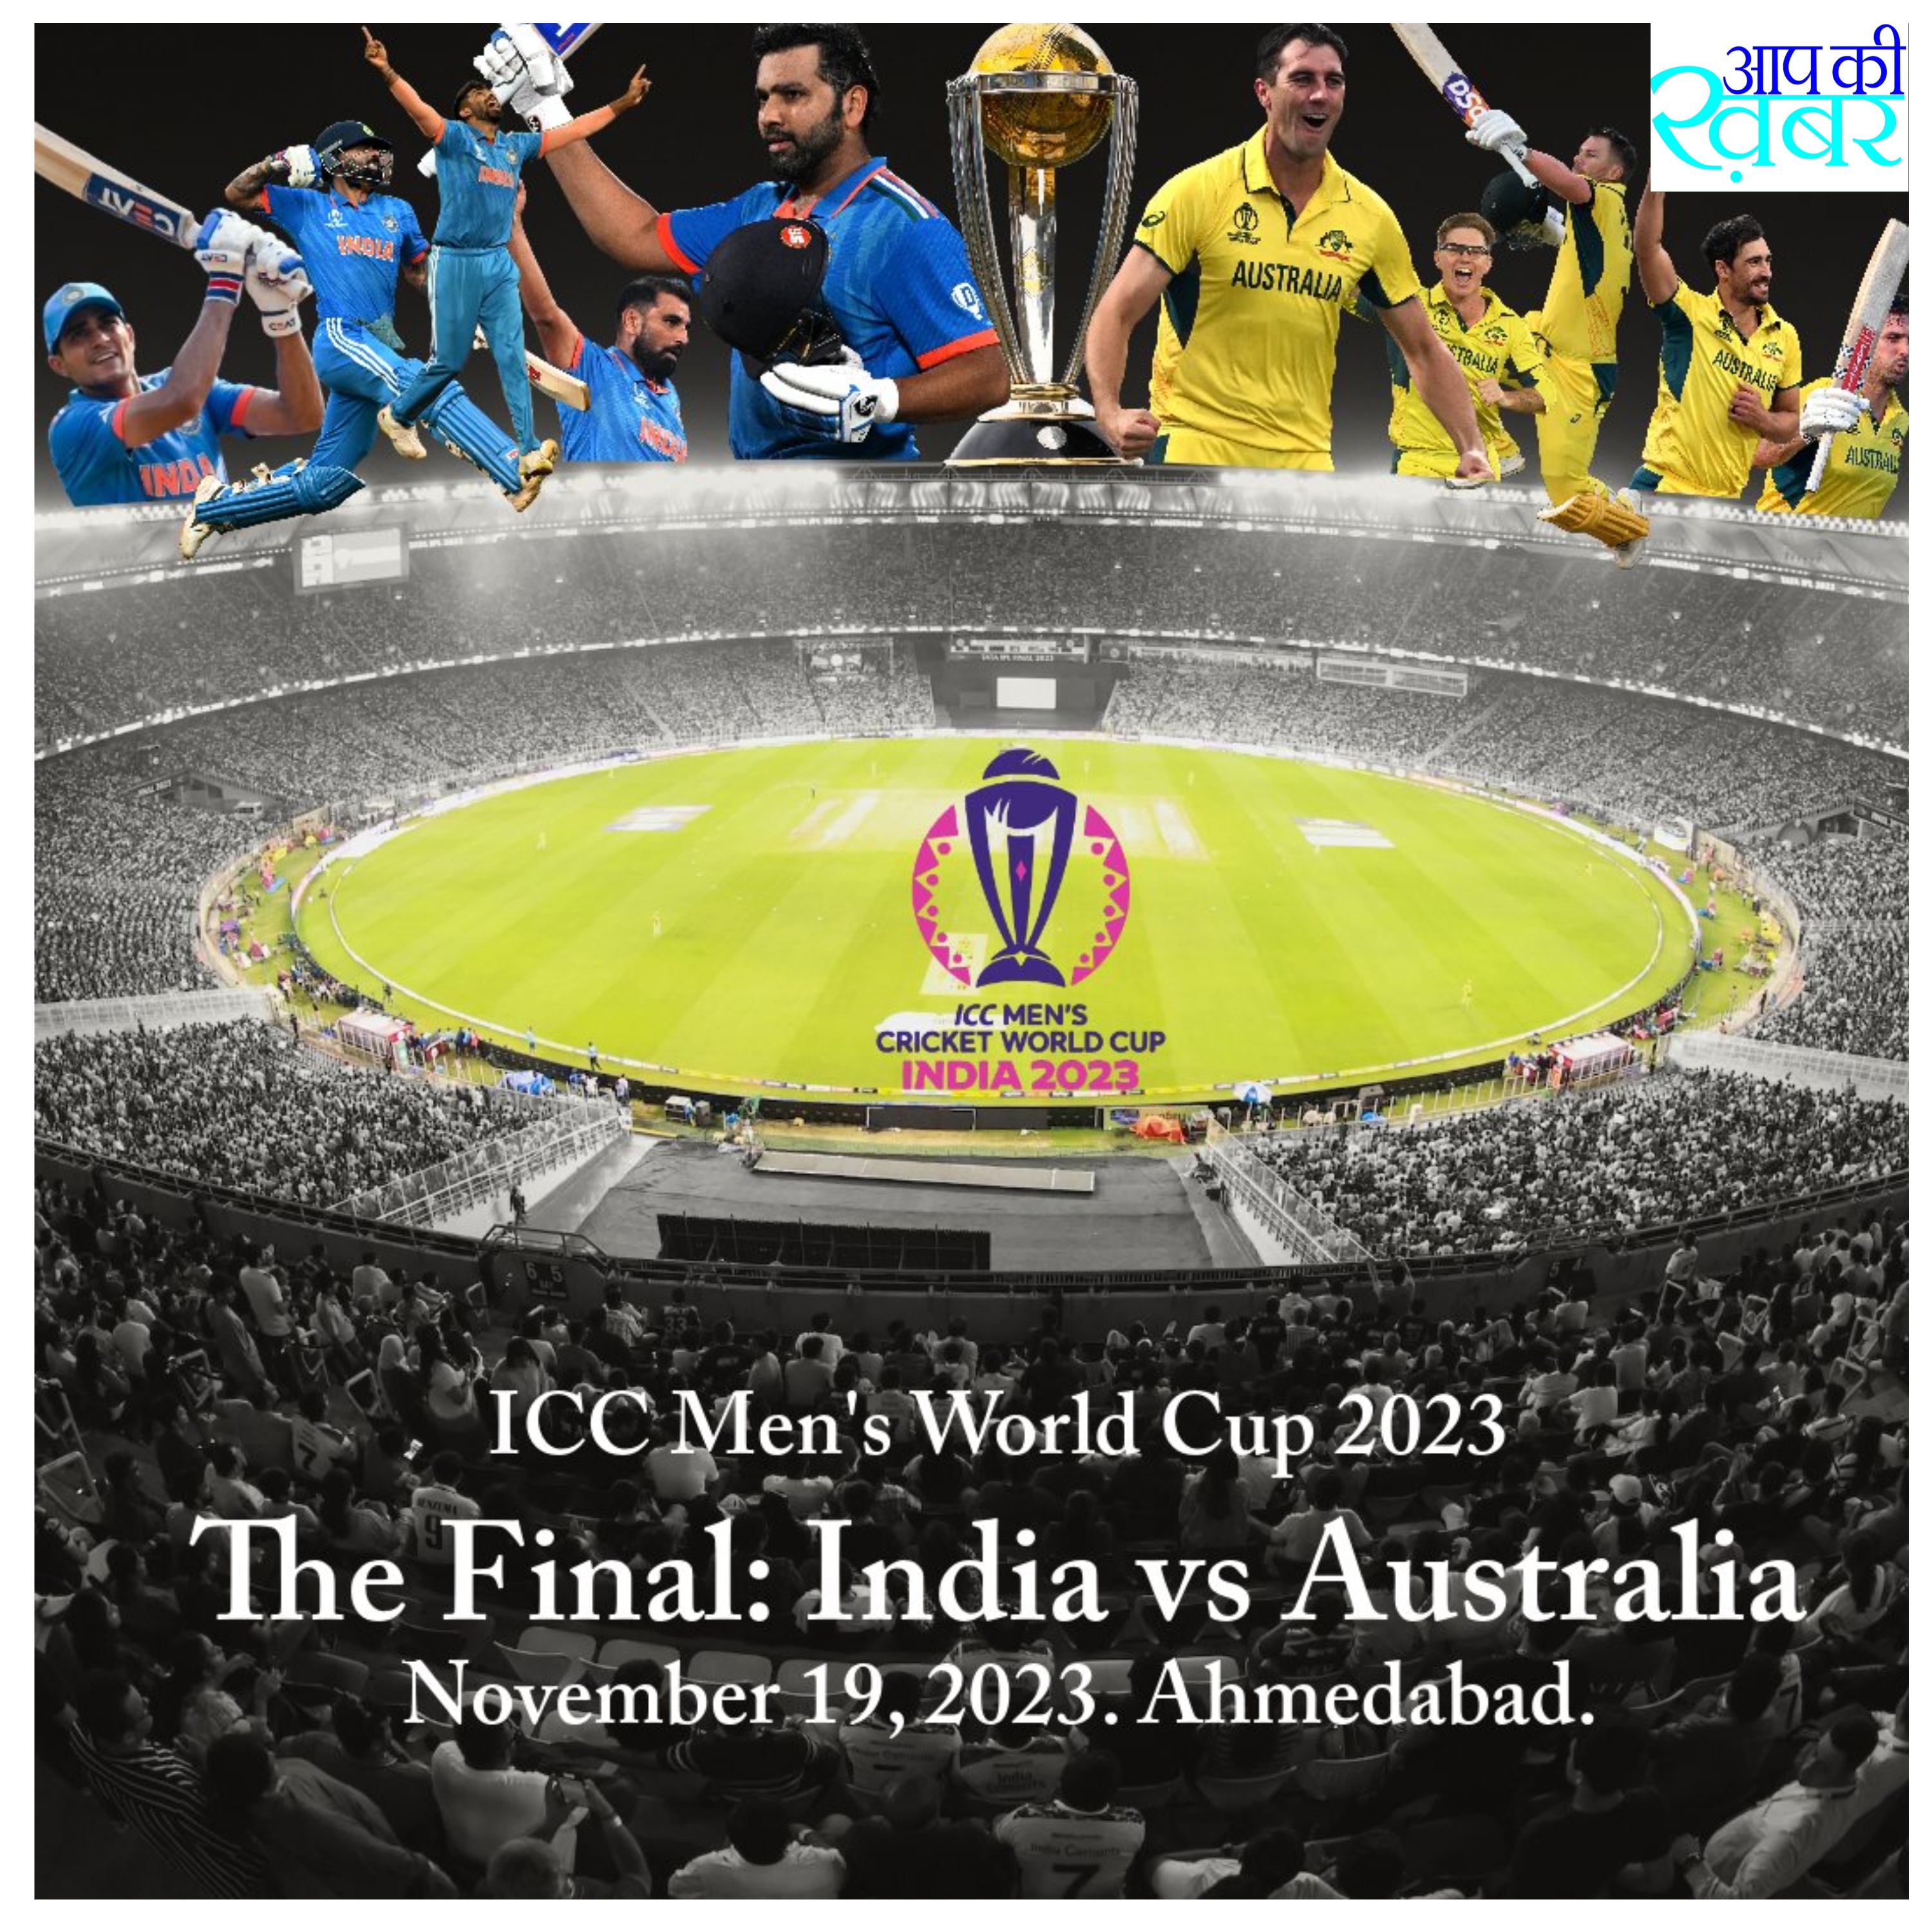 CWC 2023 Final: What is the best score in Narendra Modi Stadium? Know how many fans can watch a match at Narendra Modi Stadium.